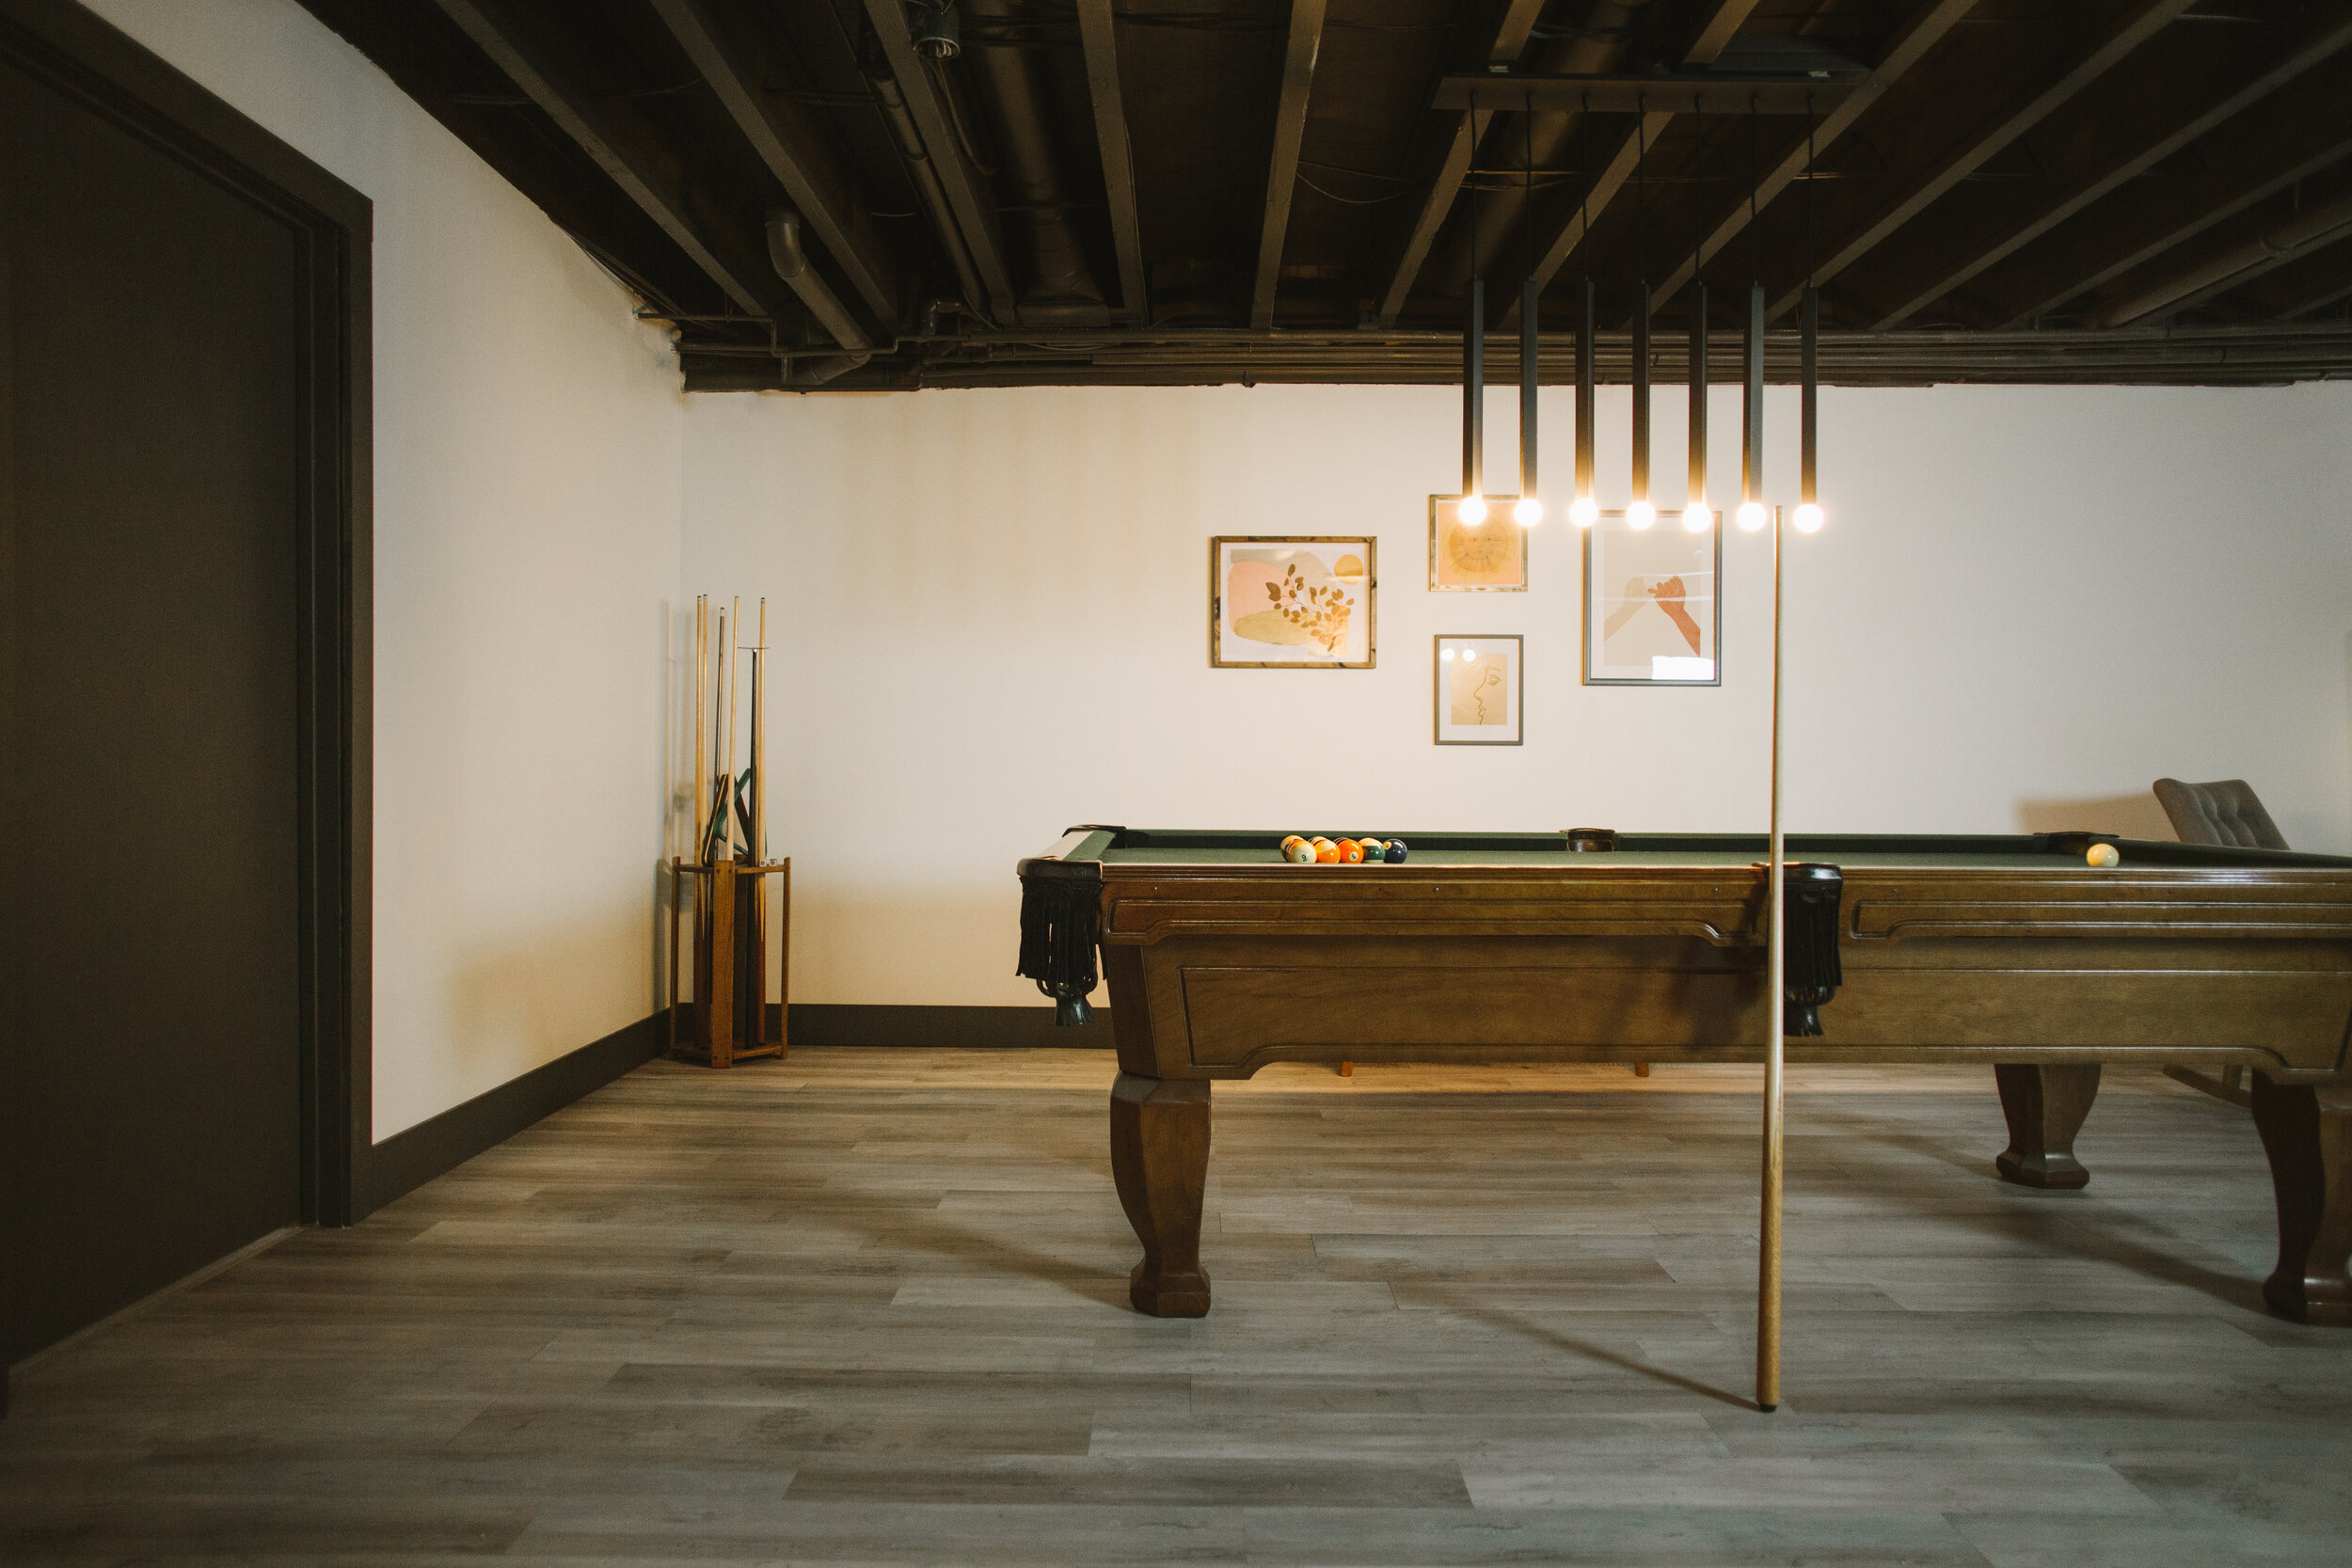 View of flooring with pool table